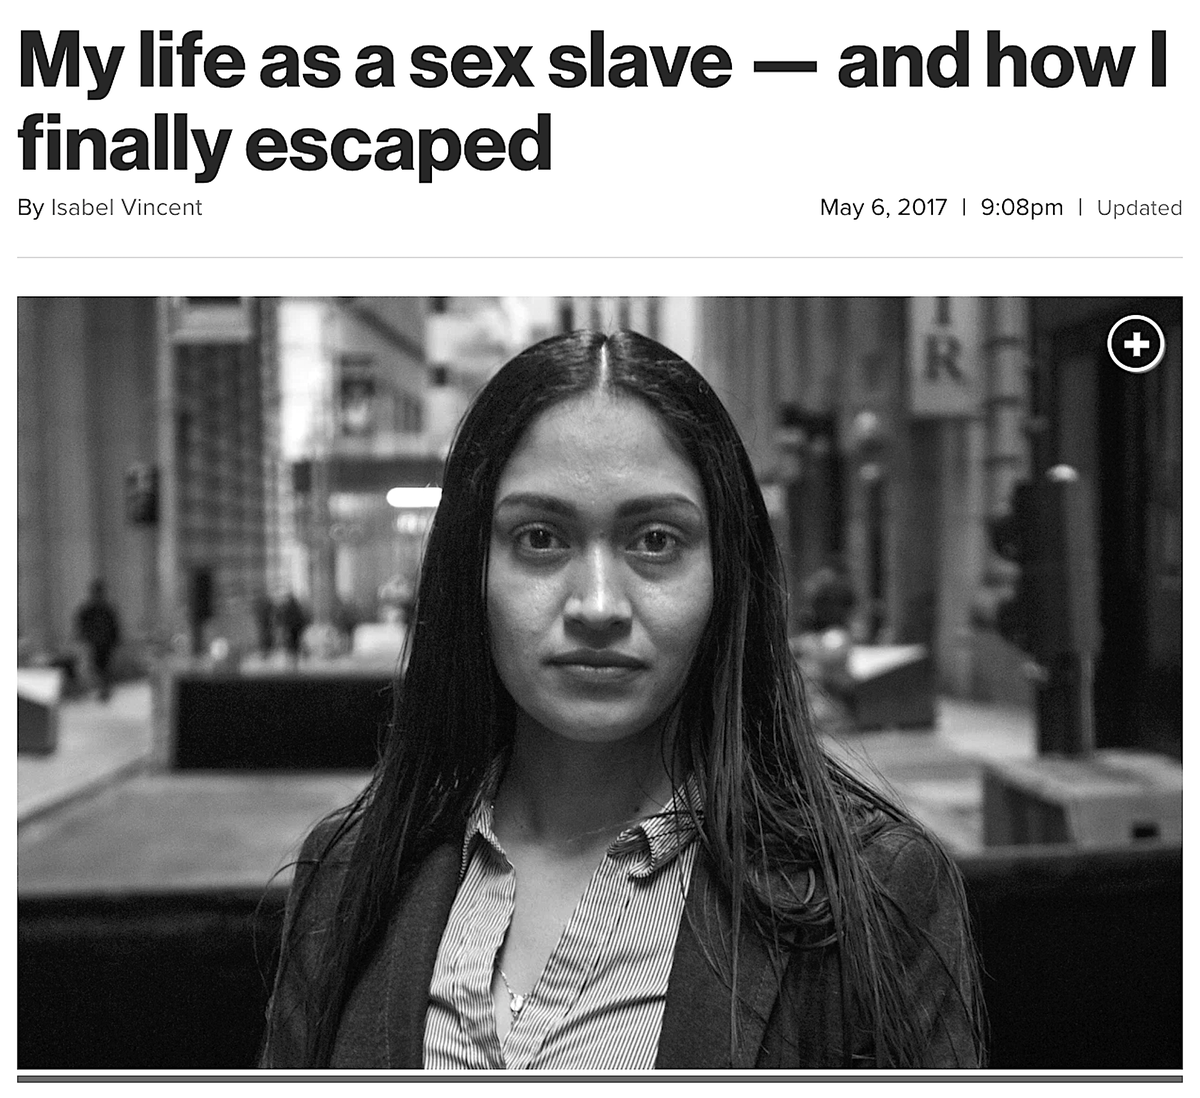 "On A Good Day, I’d Only Have To Sleep With 30 Men. We Were Delivered Like Pizzas." - SandraAt Age 19, Sandra Was Kidnapped From Her Hardscrabble Hometown In Central Mexico And Forced Into The Sex Trade.NY Post, May 6, 2017 https://nypost.com/2017/05/06/my-life-as-a-sex-slave-and-how-i-finally-escaped